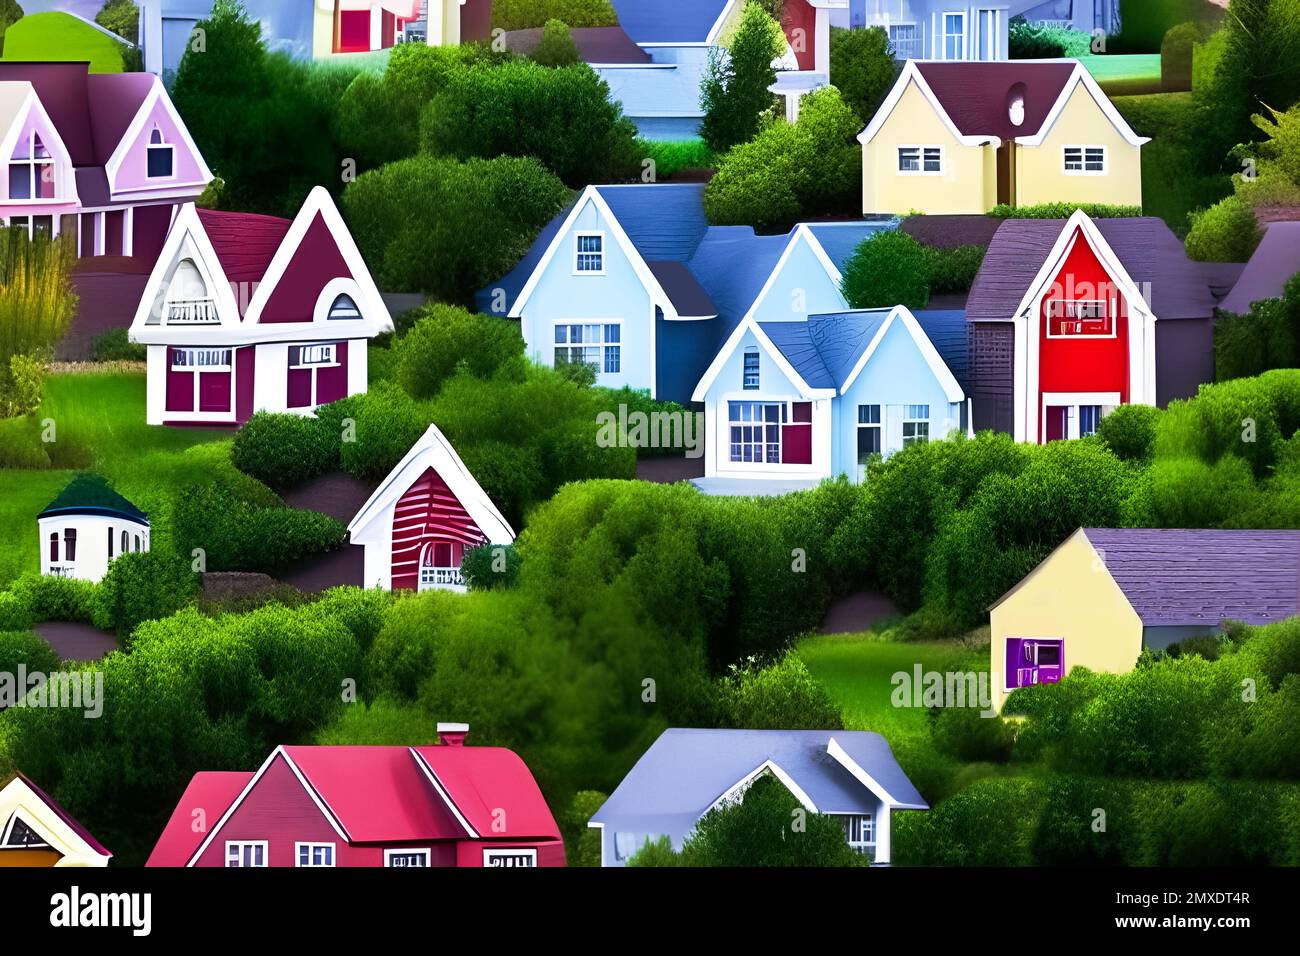 Colorful small homes on a hill in the suburbs concept. Stock Photo